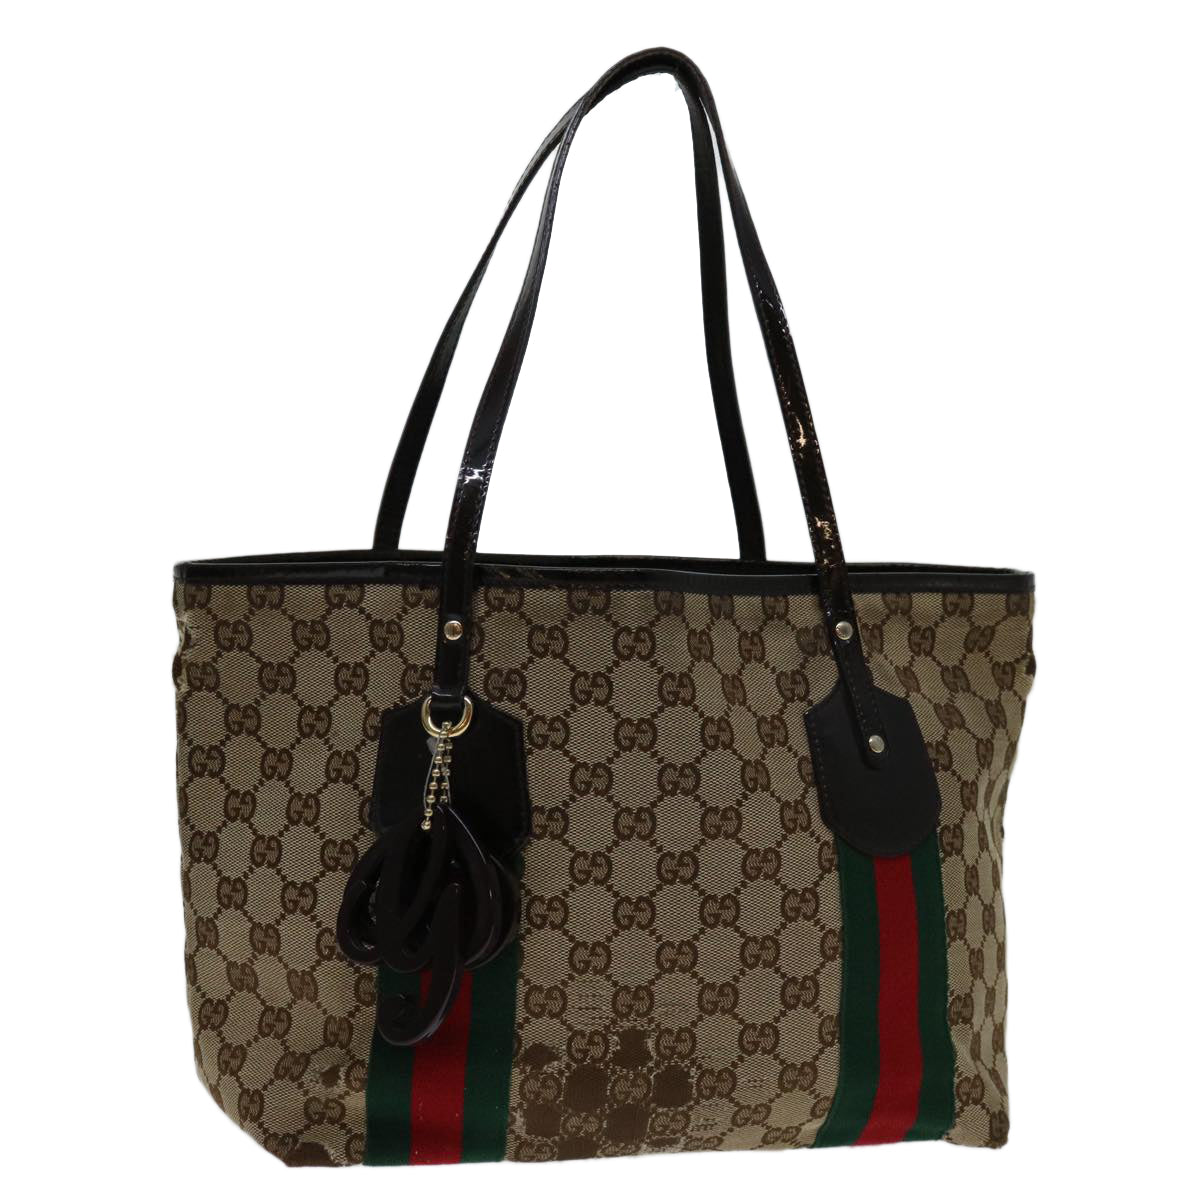 GUCCI GG Canvas Web Sherry Line Tote Bag Beige Red Green 211971 Auth 69638